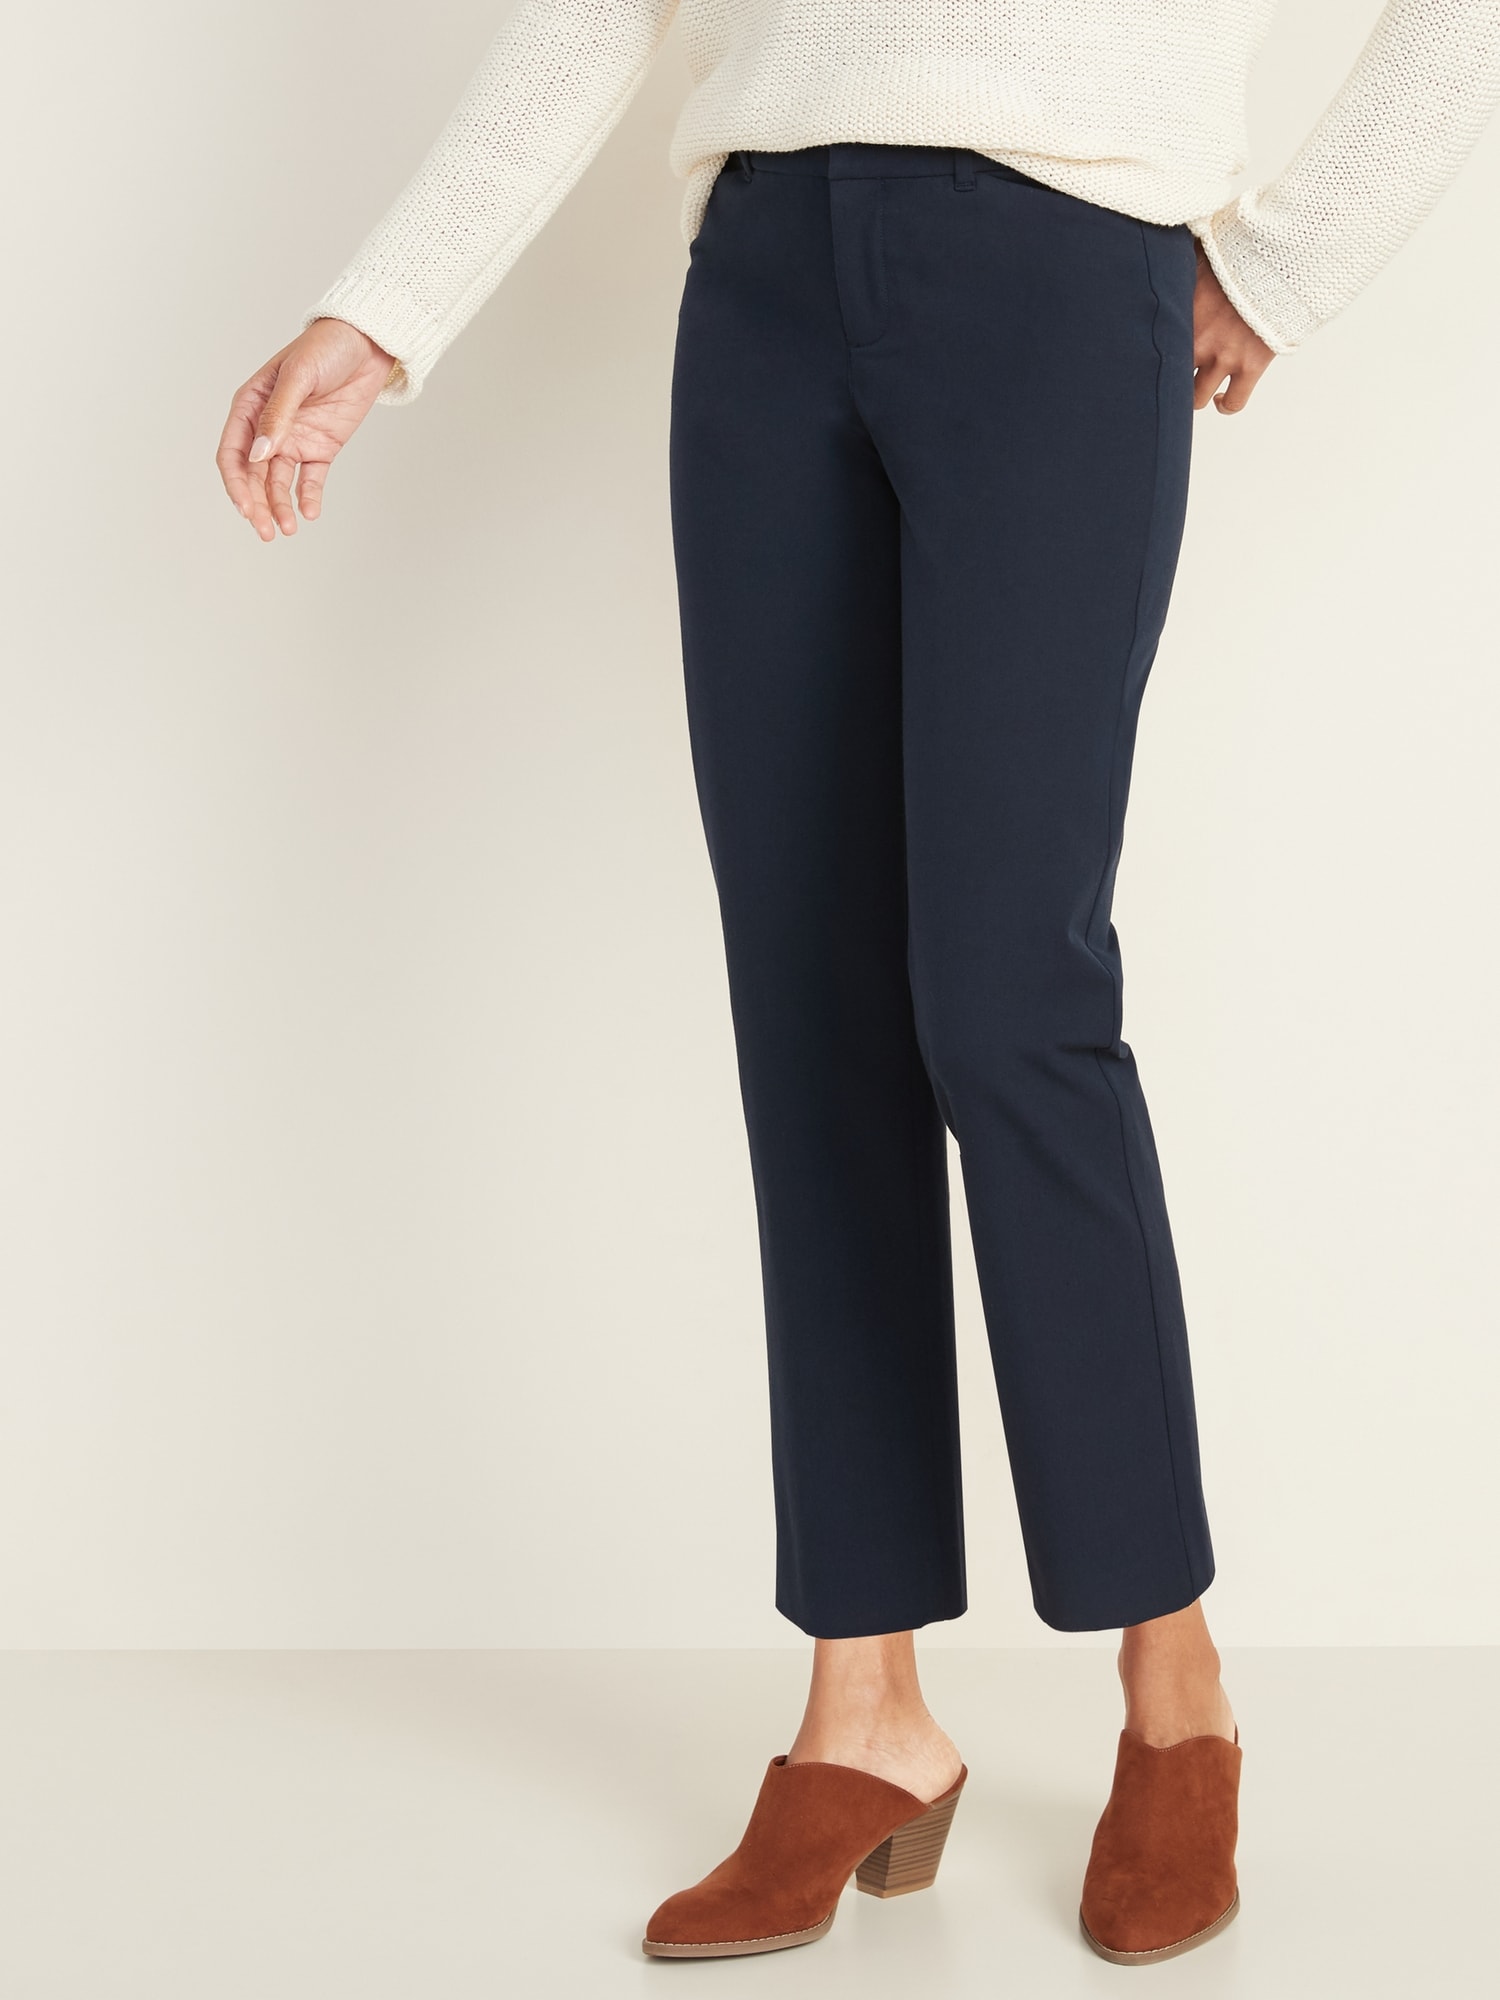 Old Navy All-New Mid-Rise Pixie Ankle Pants for Women  Pants for women, Ankle  pants, Celebrities fall fashion